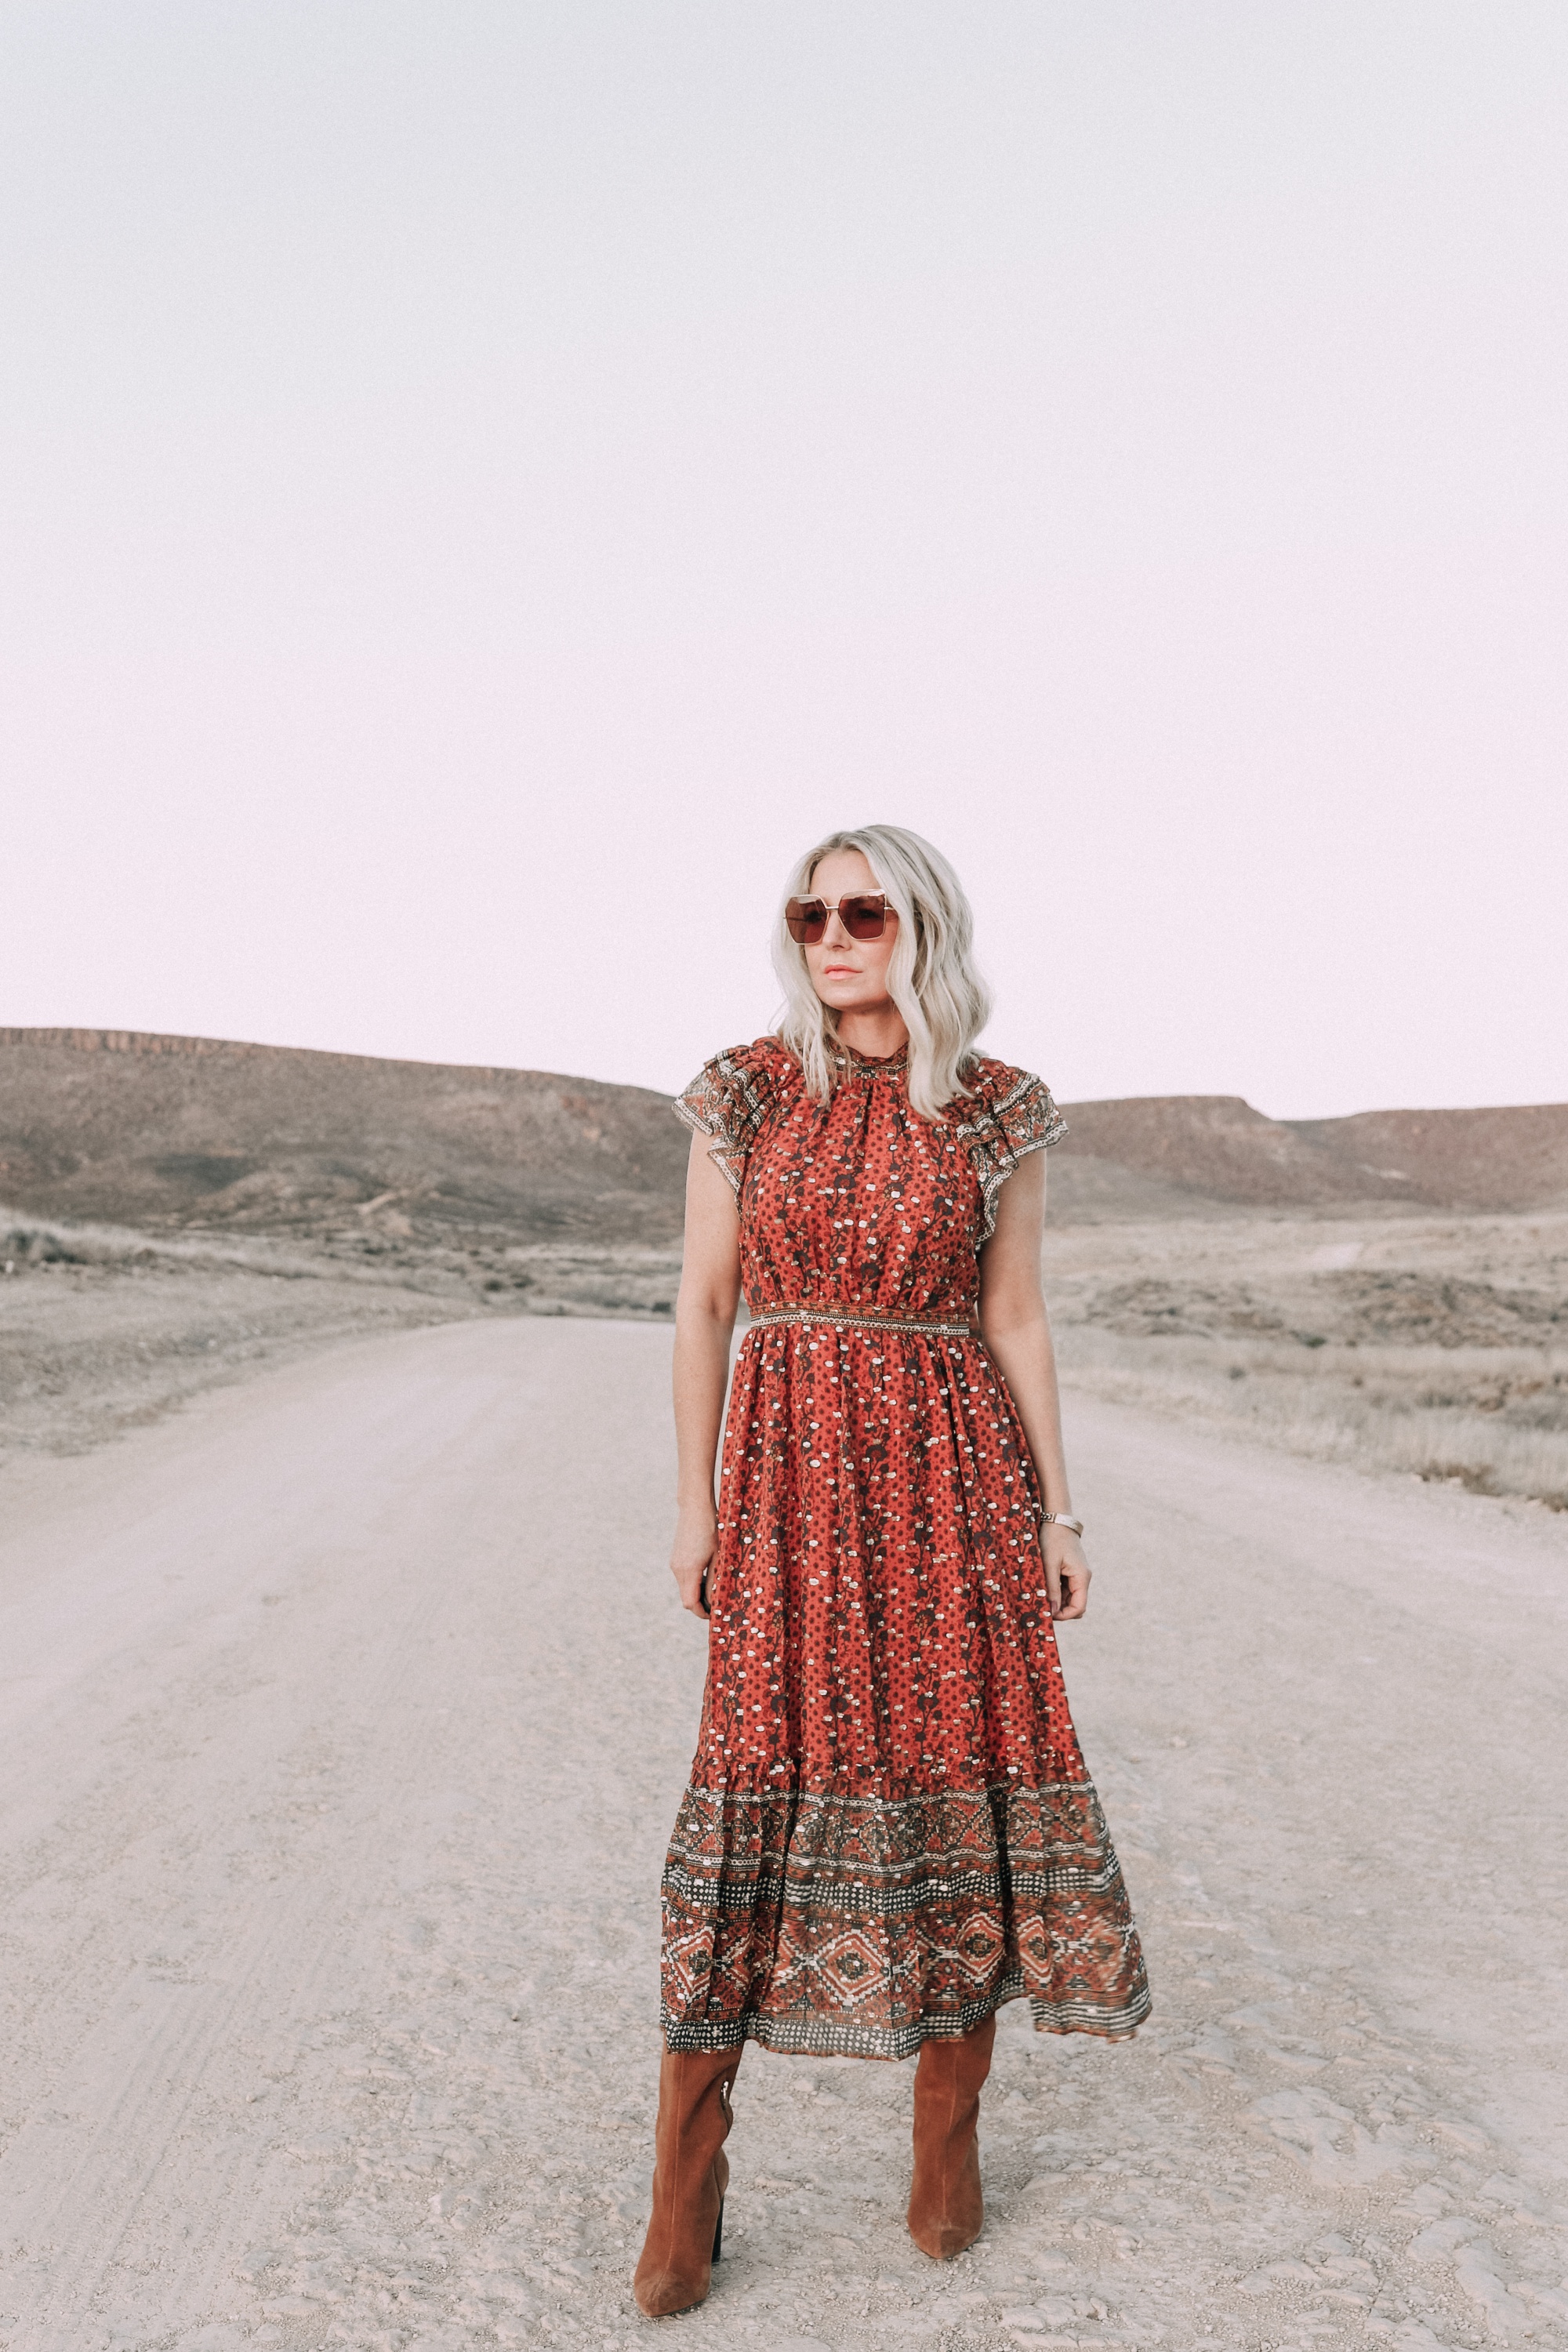 Ulla Johnson Dress, Fashion Blogger Erin Busbee of BusbeeStyle.com wearing the Ulla Johnson Alistair Dress with brown suede boots at Cibolo Creek Ranch in Texas